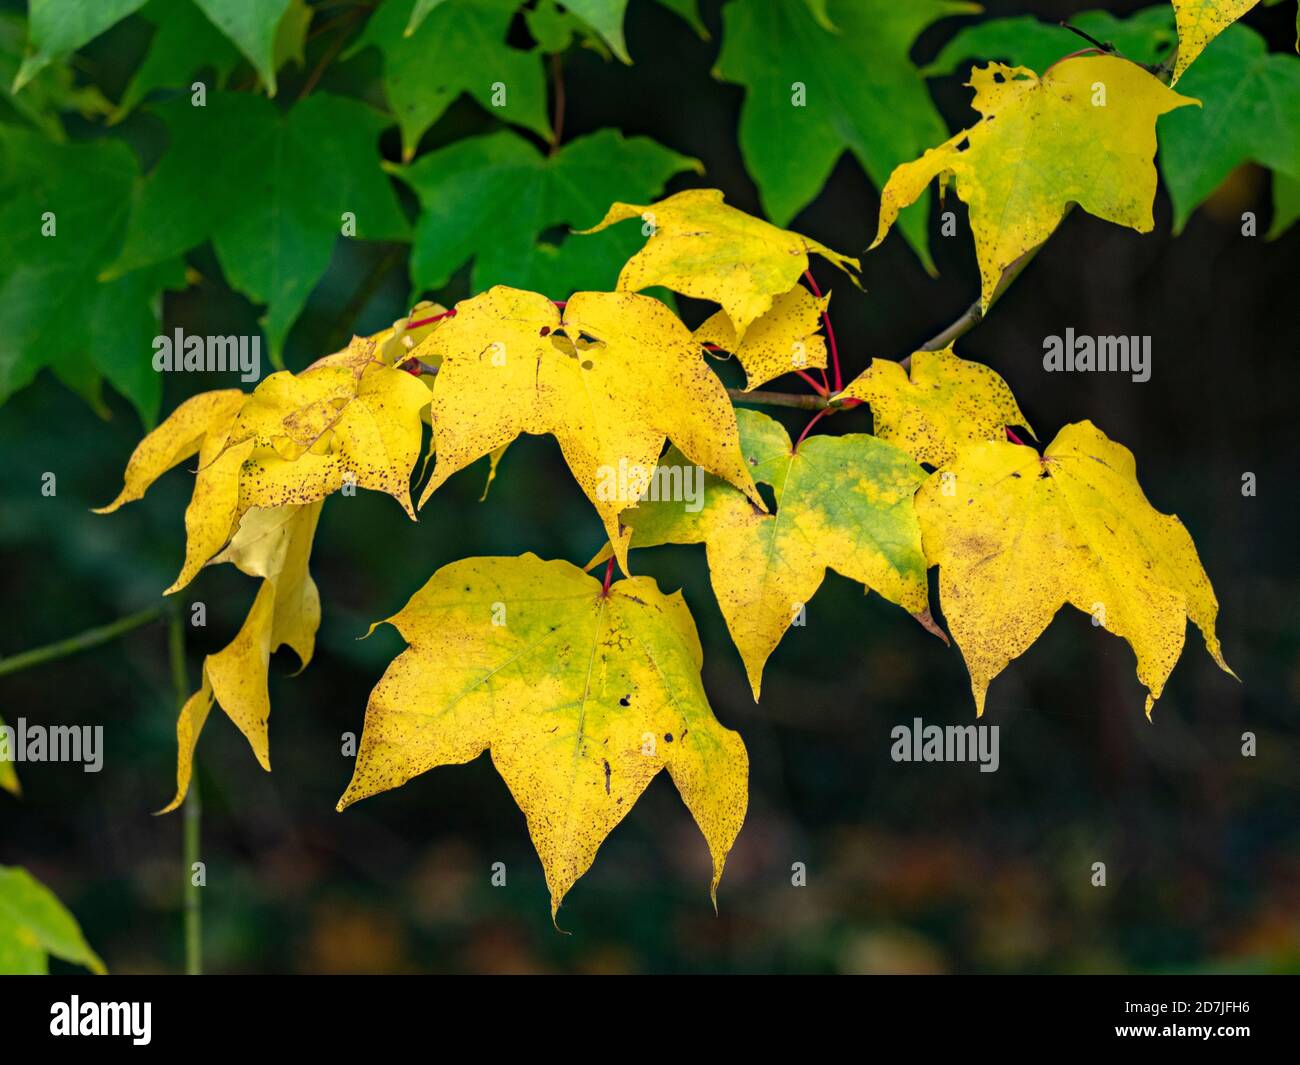 Acer parte in autunno, Thorpre Perrow Arboretum, vicino a Bedale, North Yorkshire, Inghilterra Foto Stock